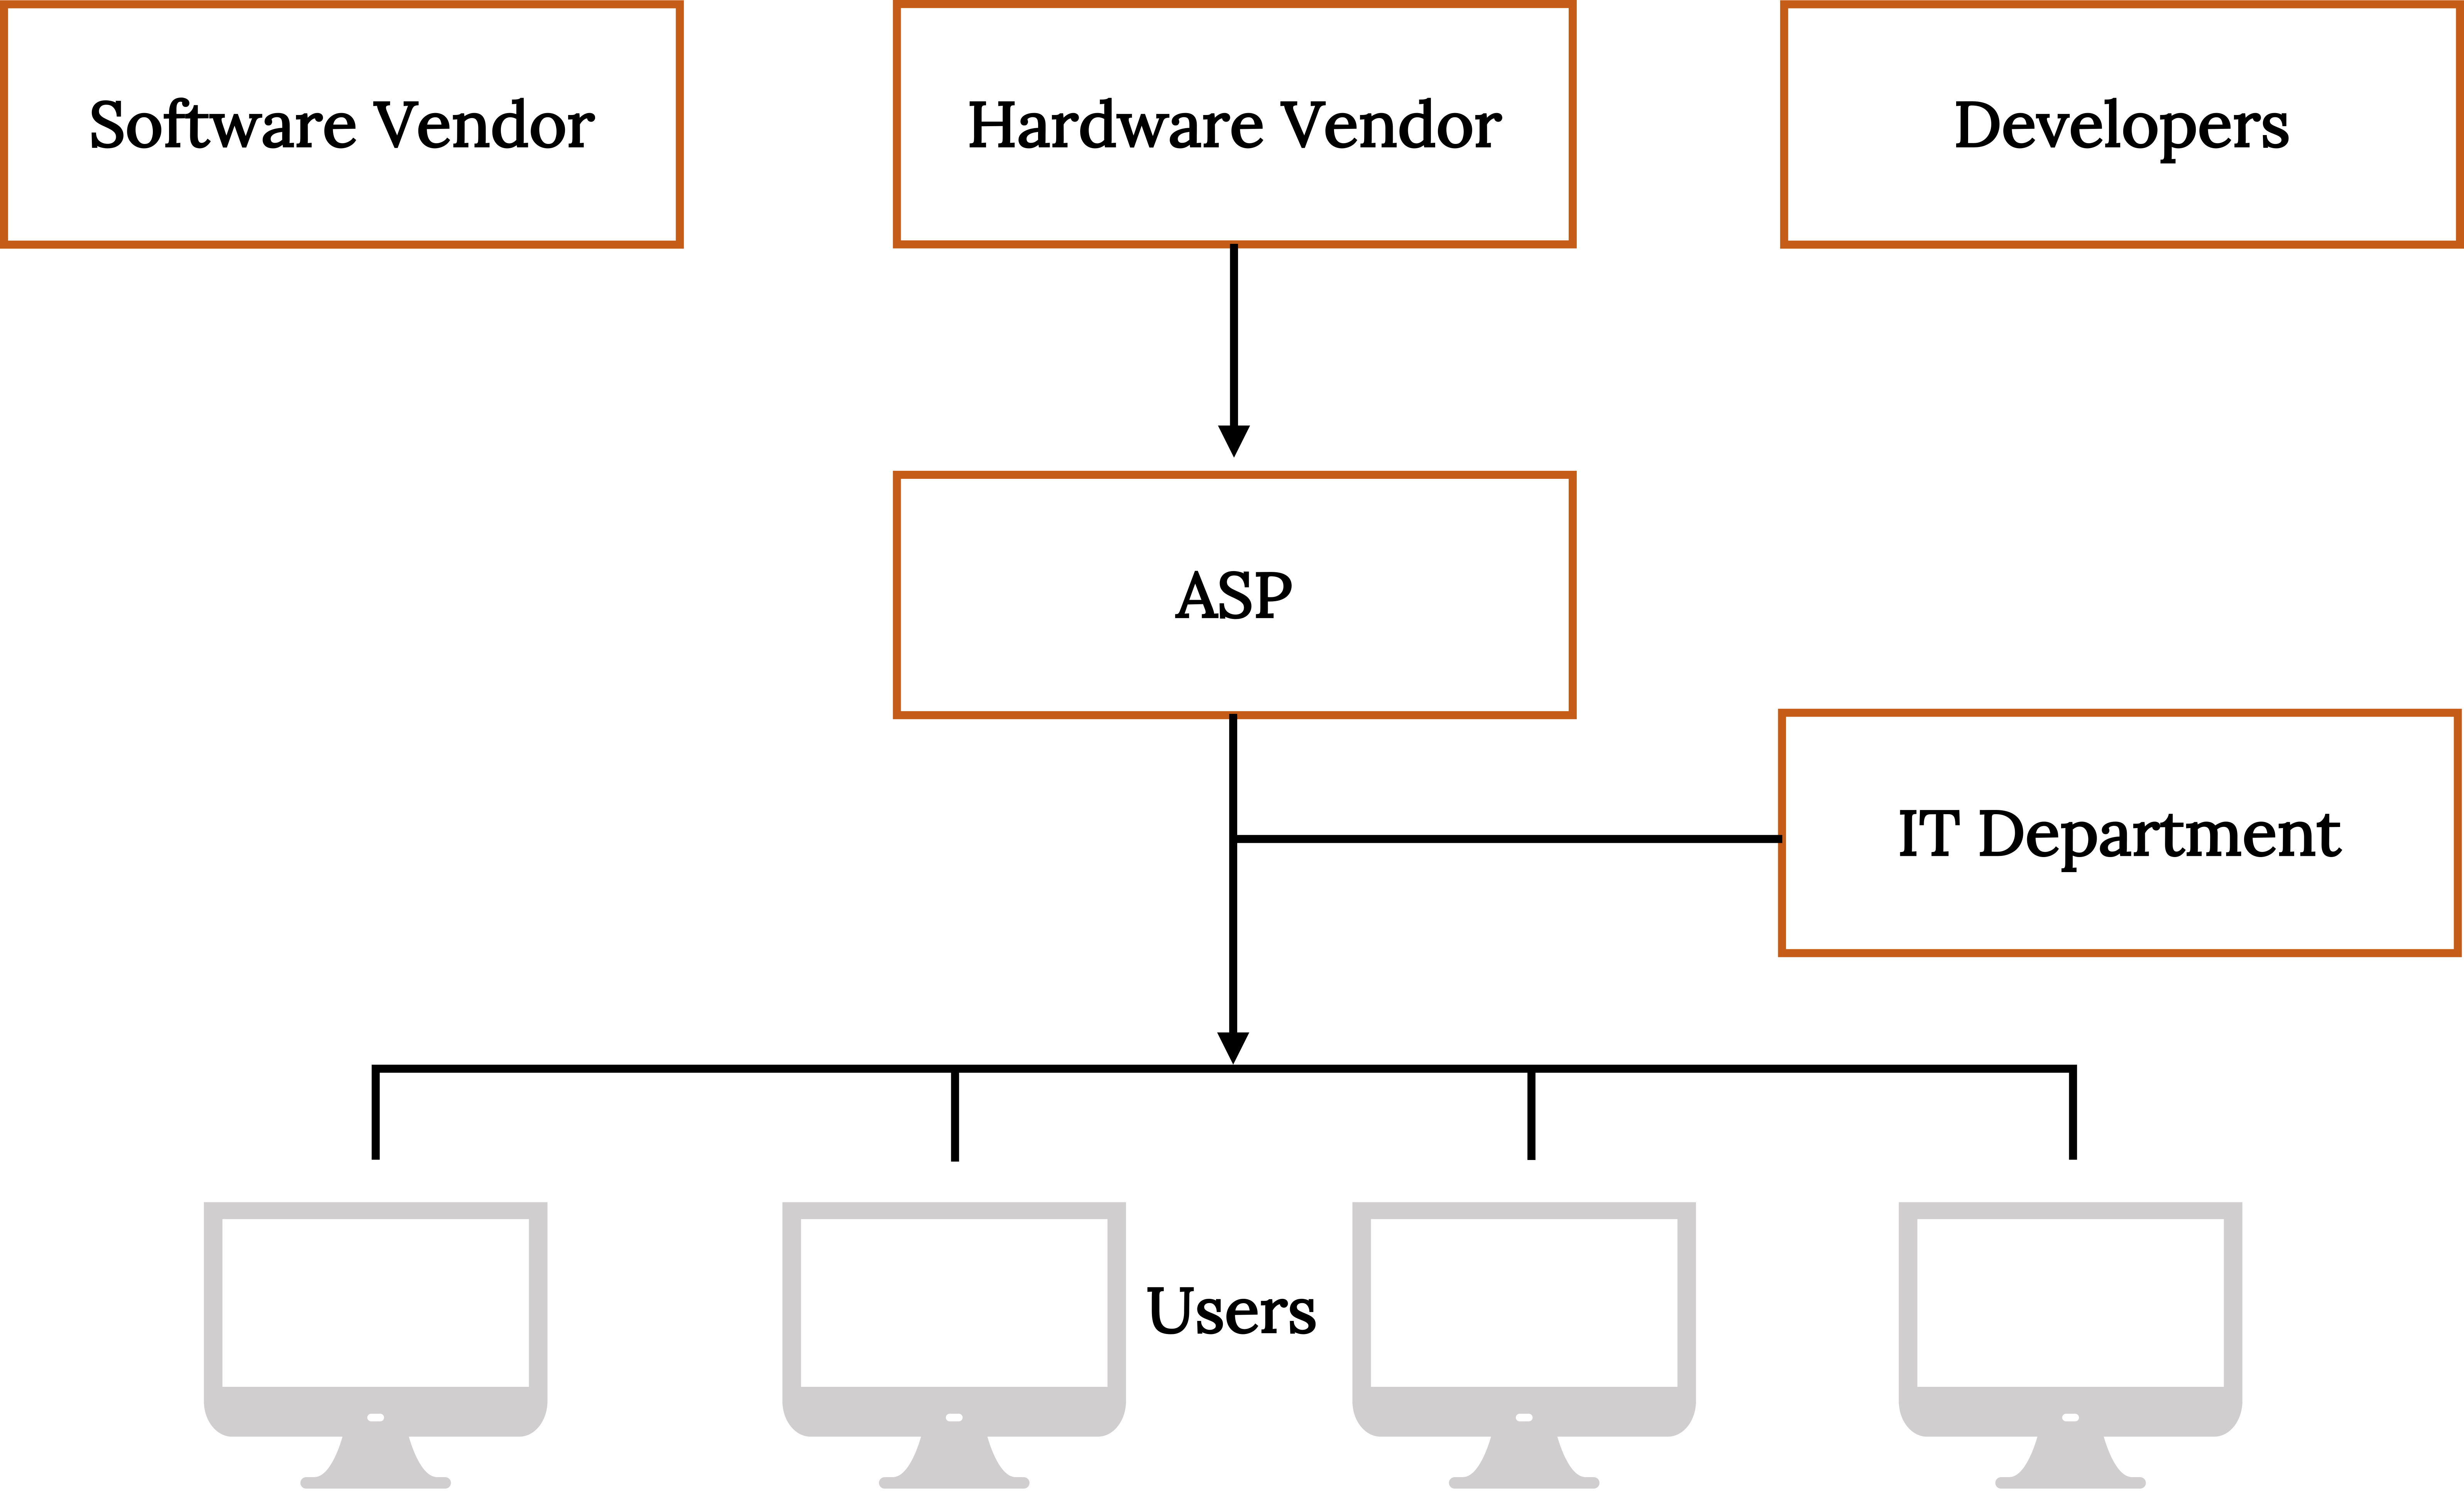 A diagram shows that a software vendor, hardware vendor, and developers all flow into an ASP, which then flows into an audience of users. Between the ASP and the users is the IT department.